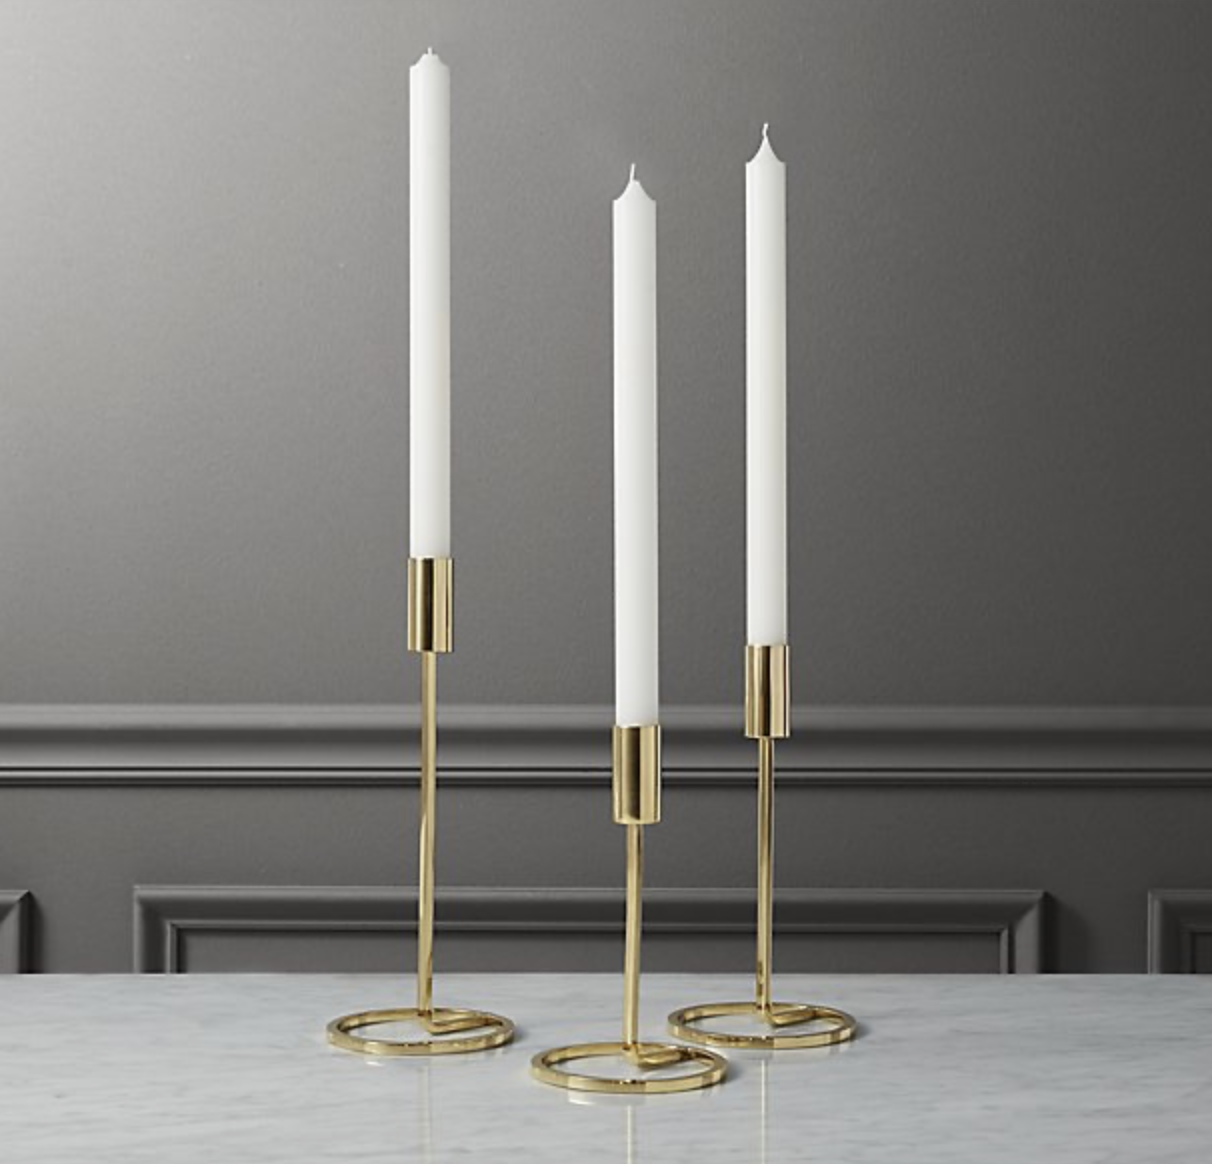 3-PIECE ROUNDABOUT TAPER CANDLE HOLDER SET, $39